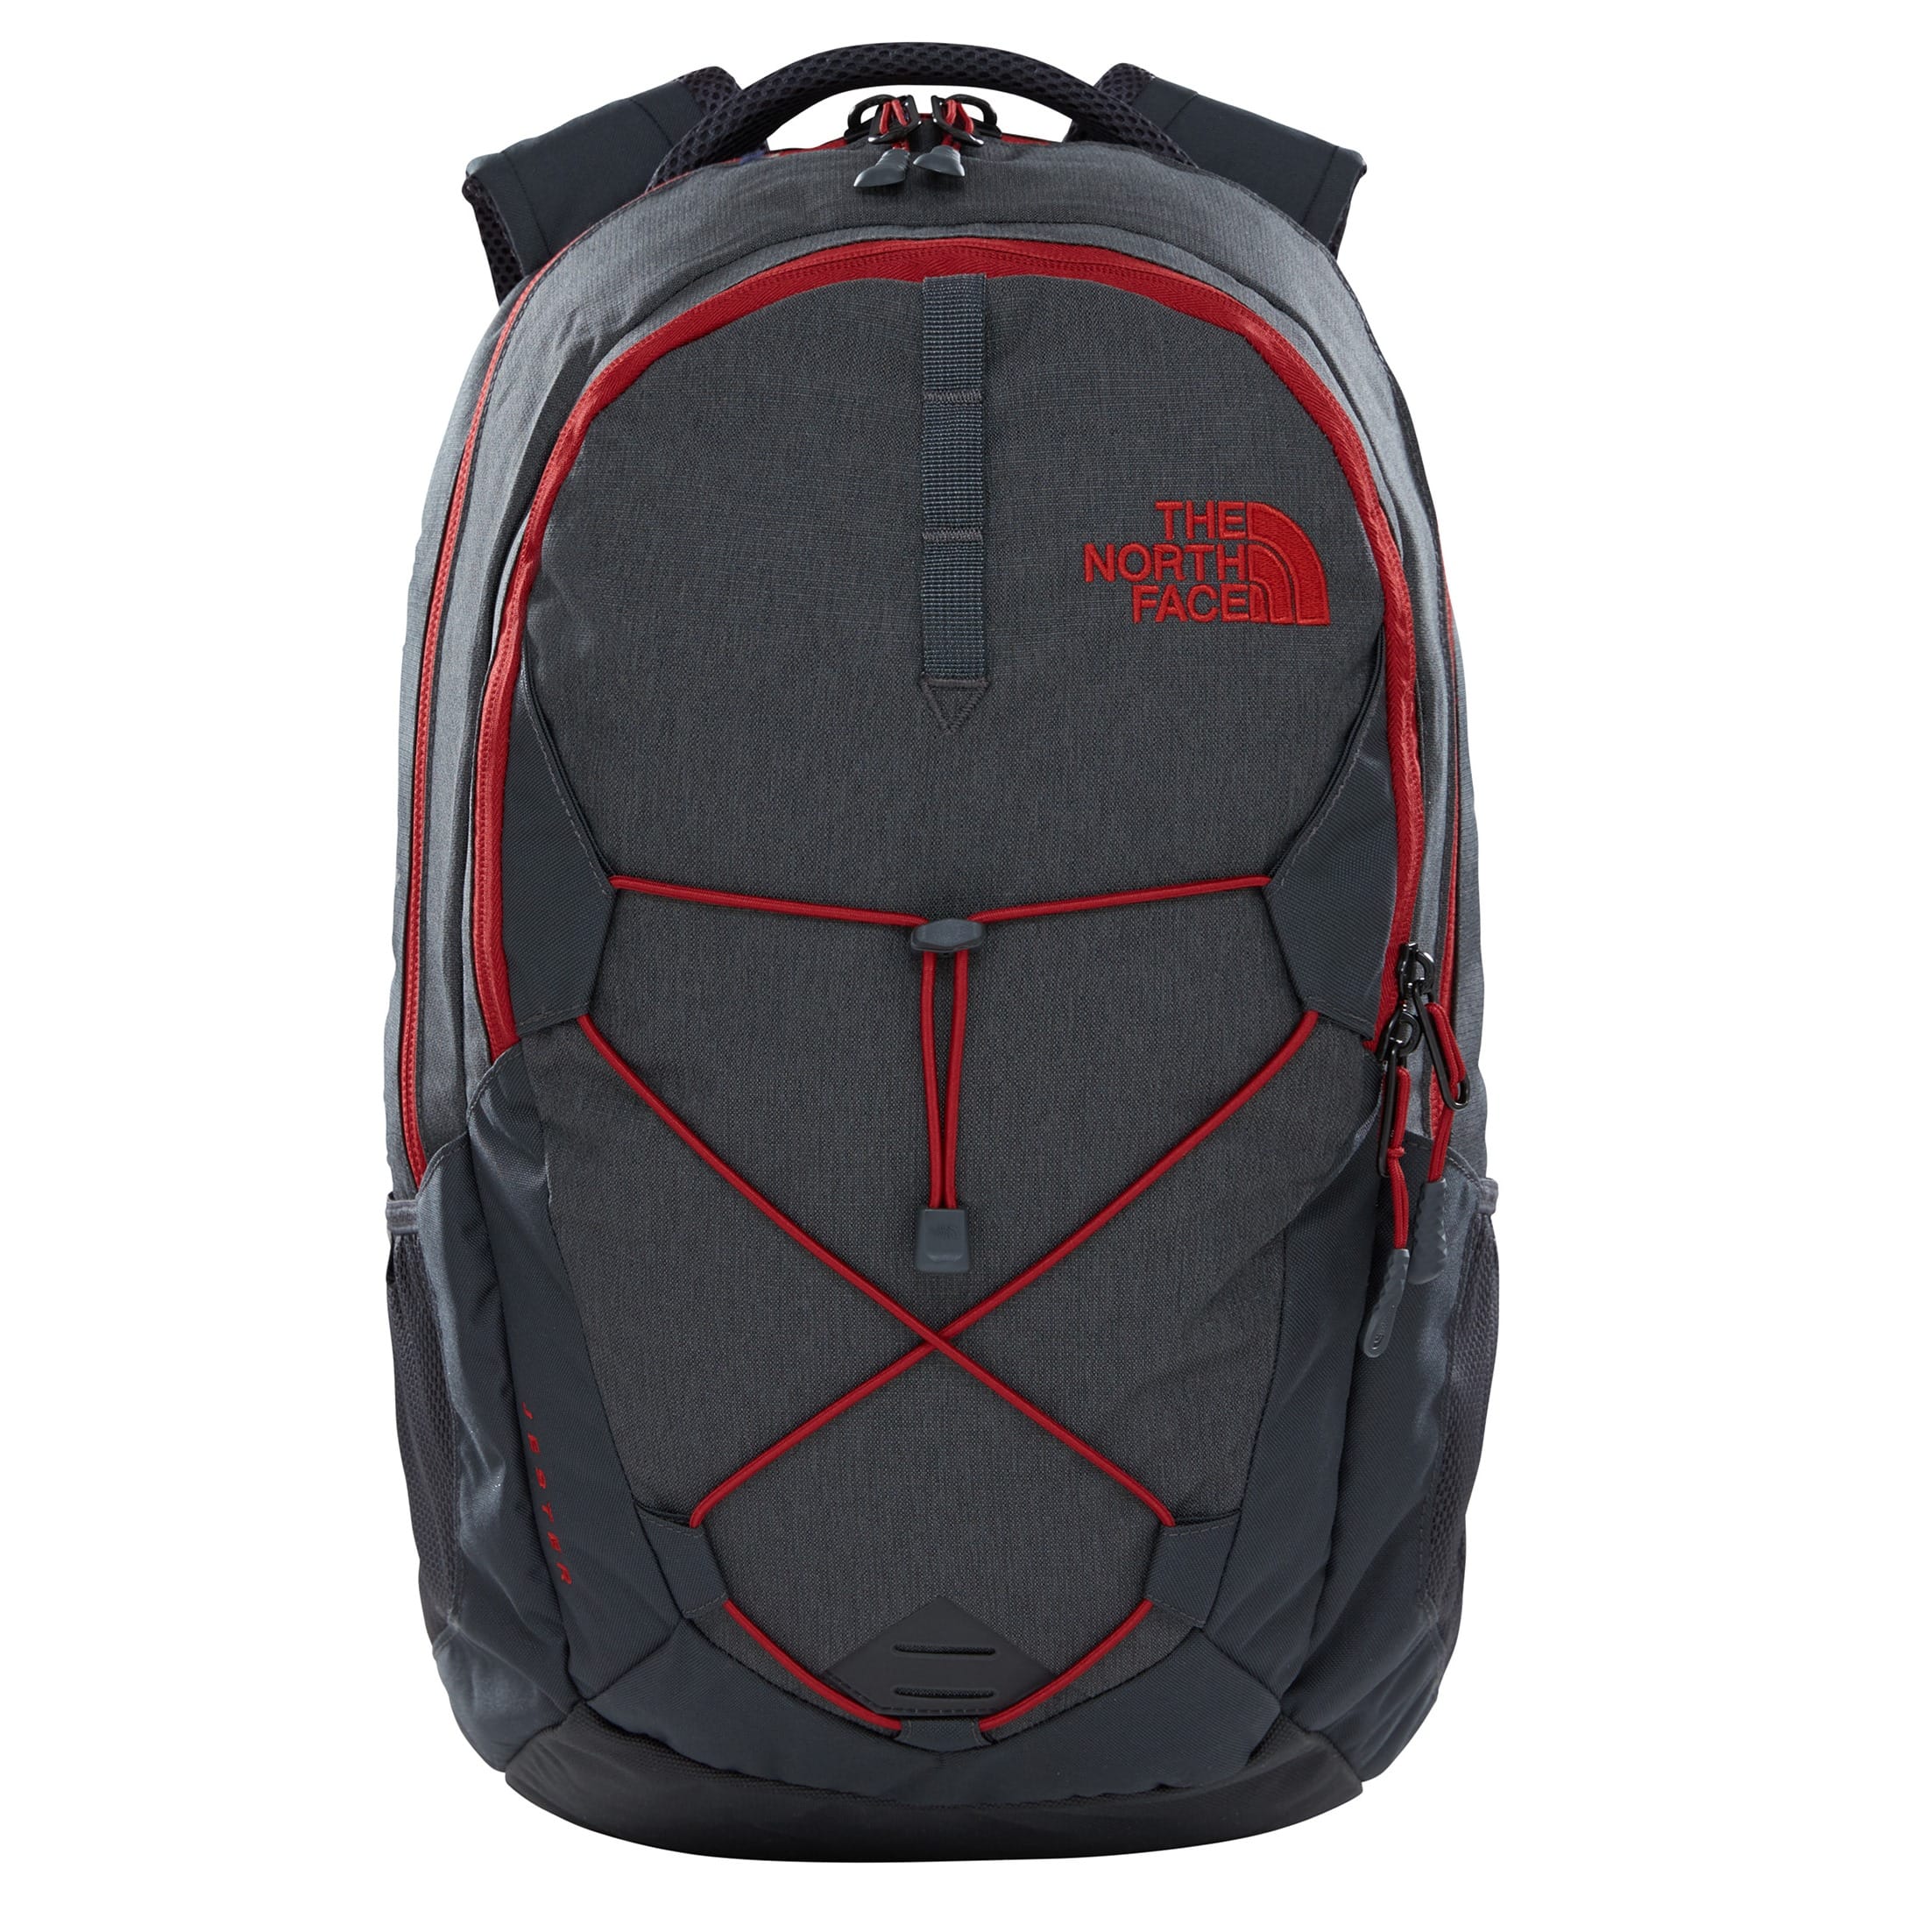 Buy The North Face Jester from Outnorth